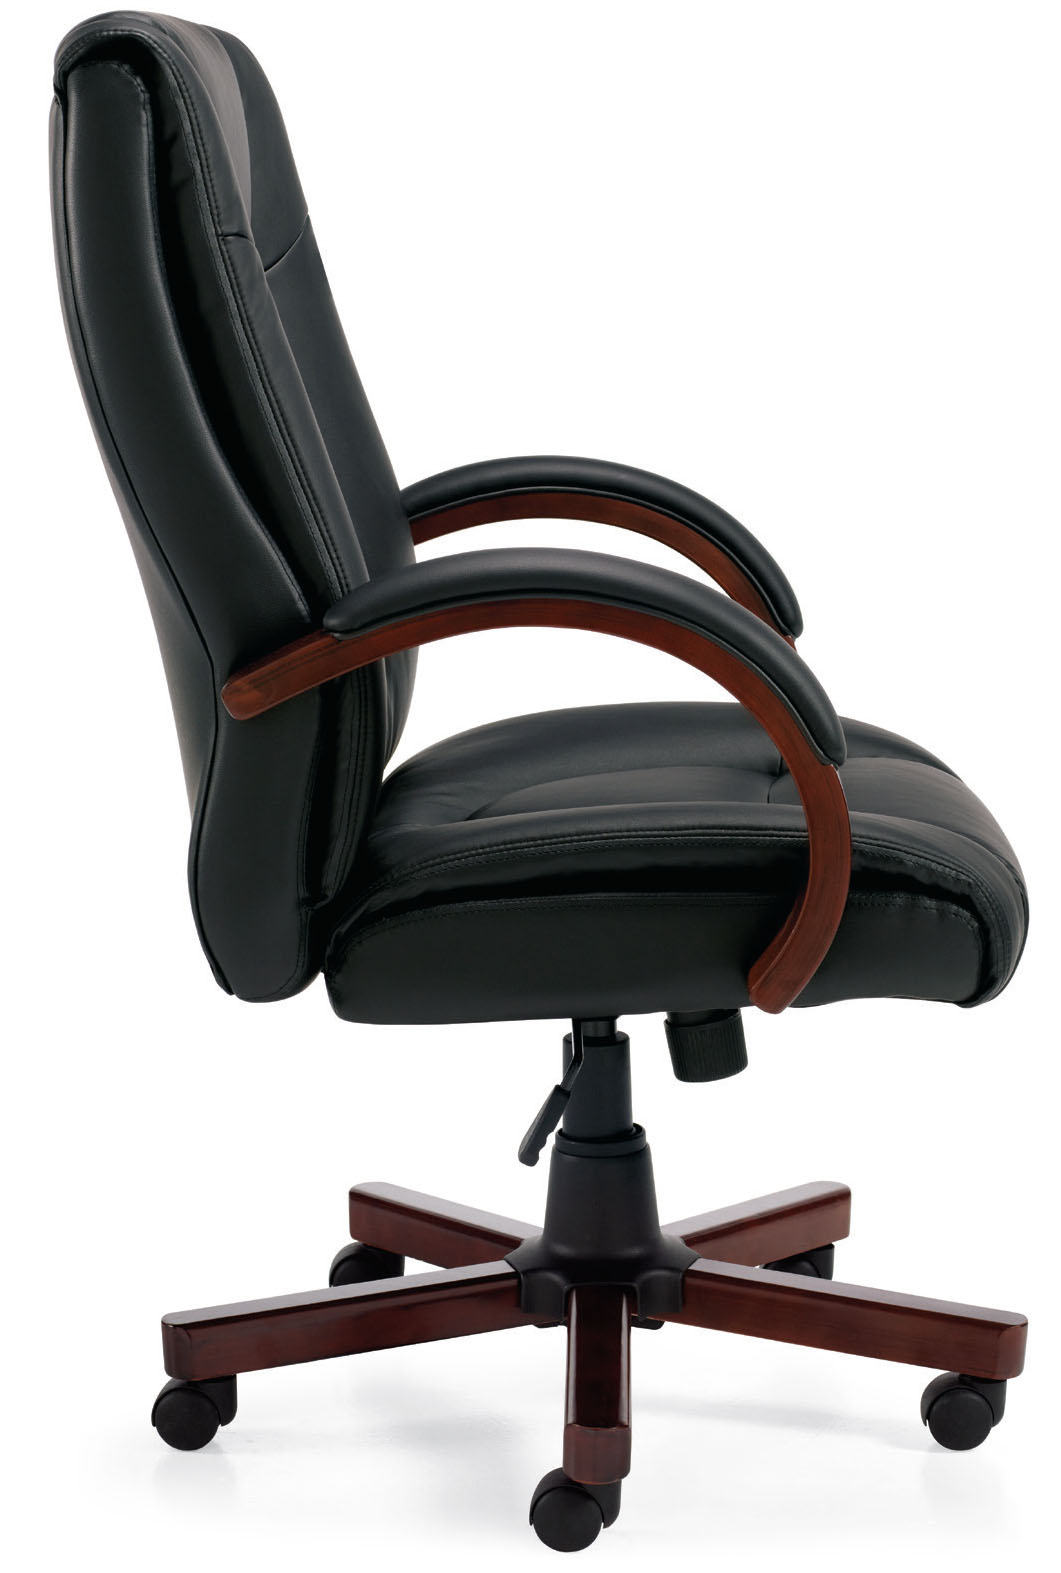 Offices To Go™ Luxhide Executive Chair with Wood Arms and Base, OTG11300